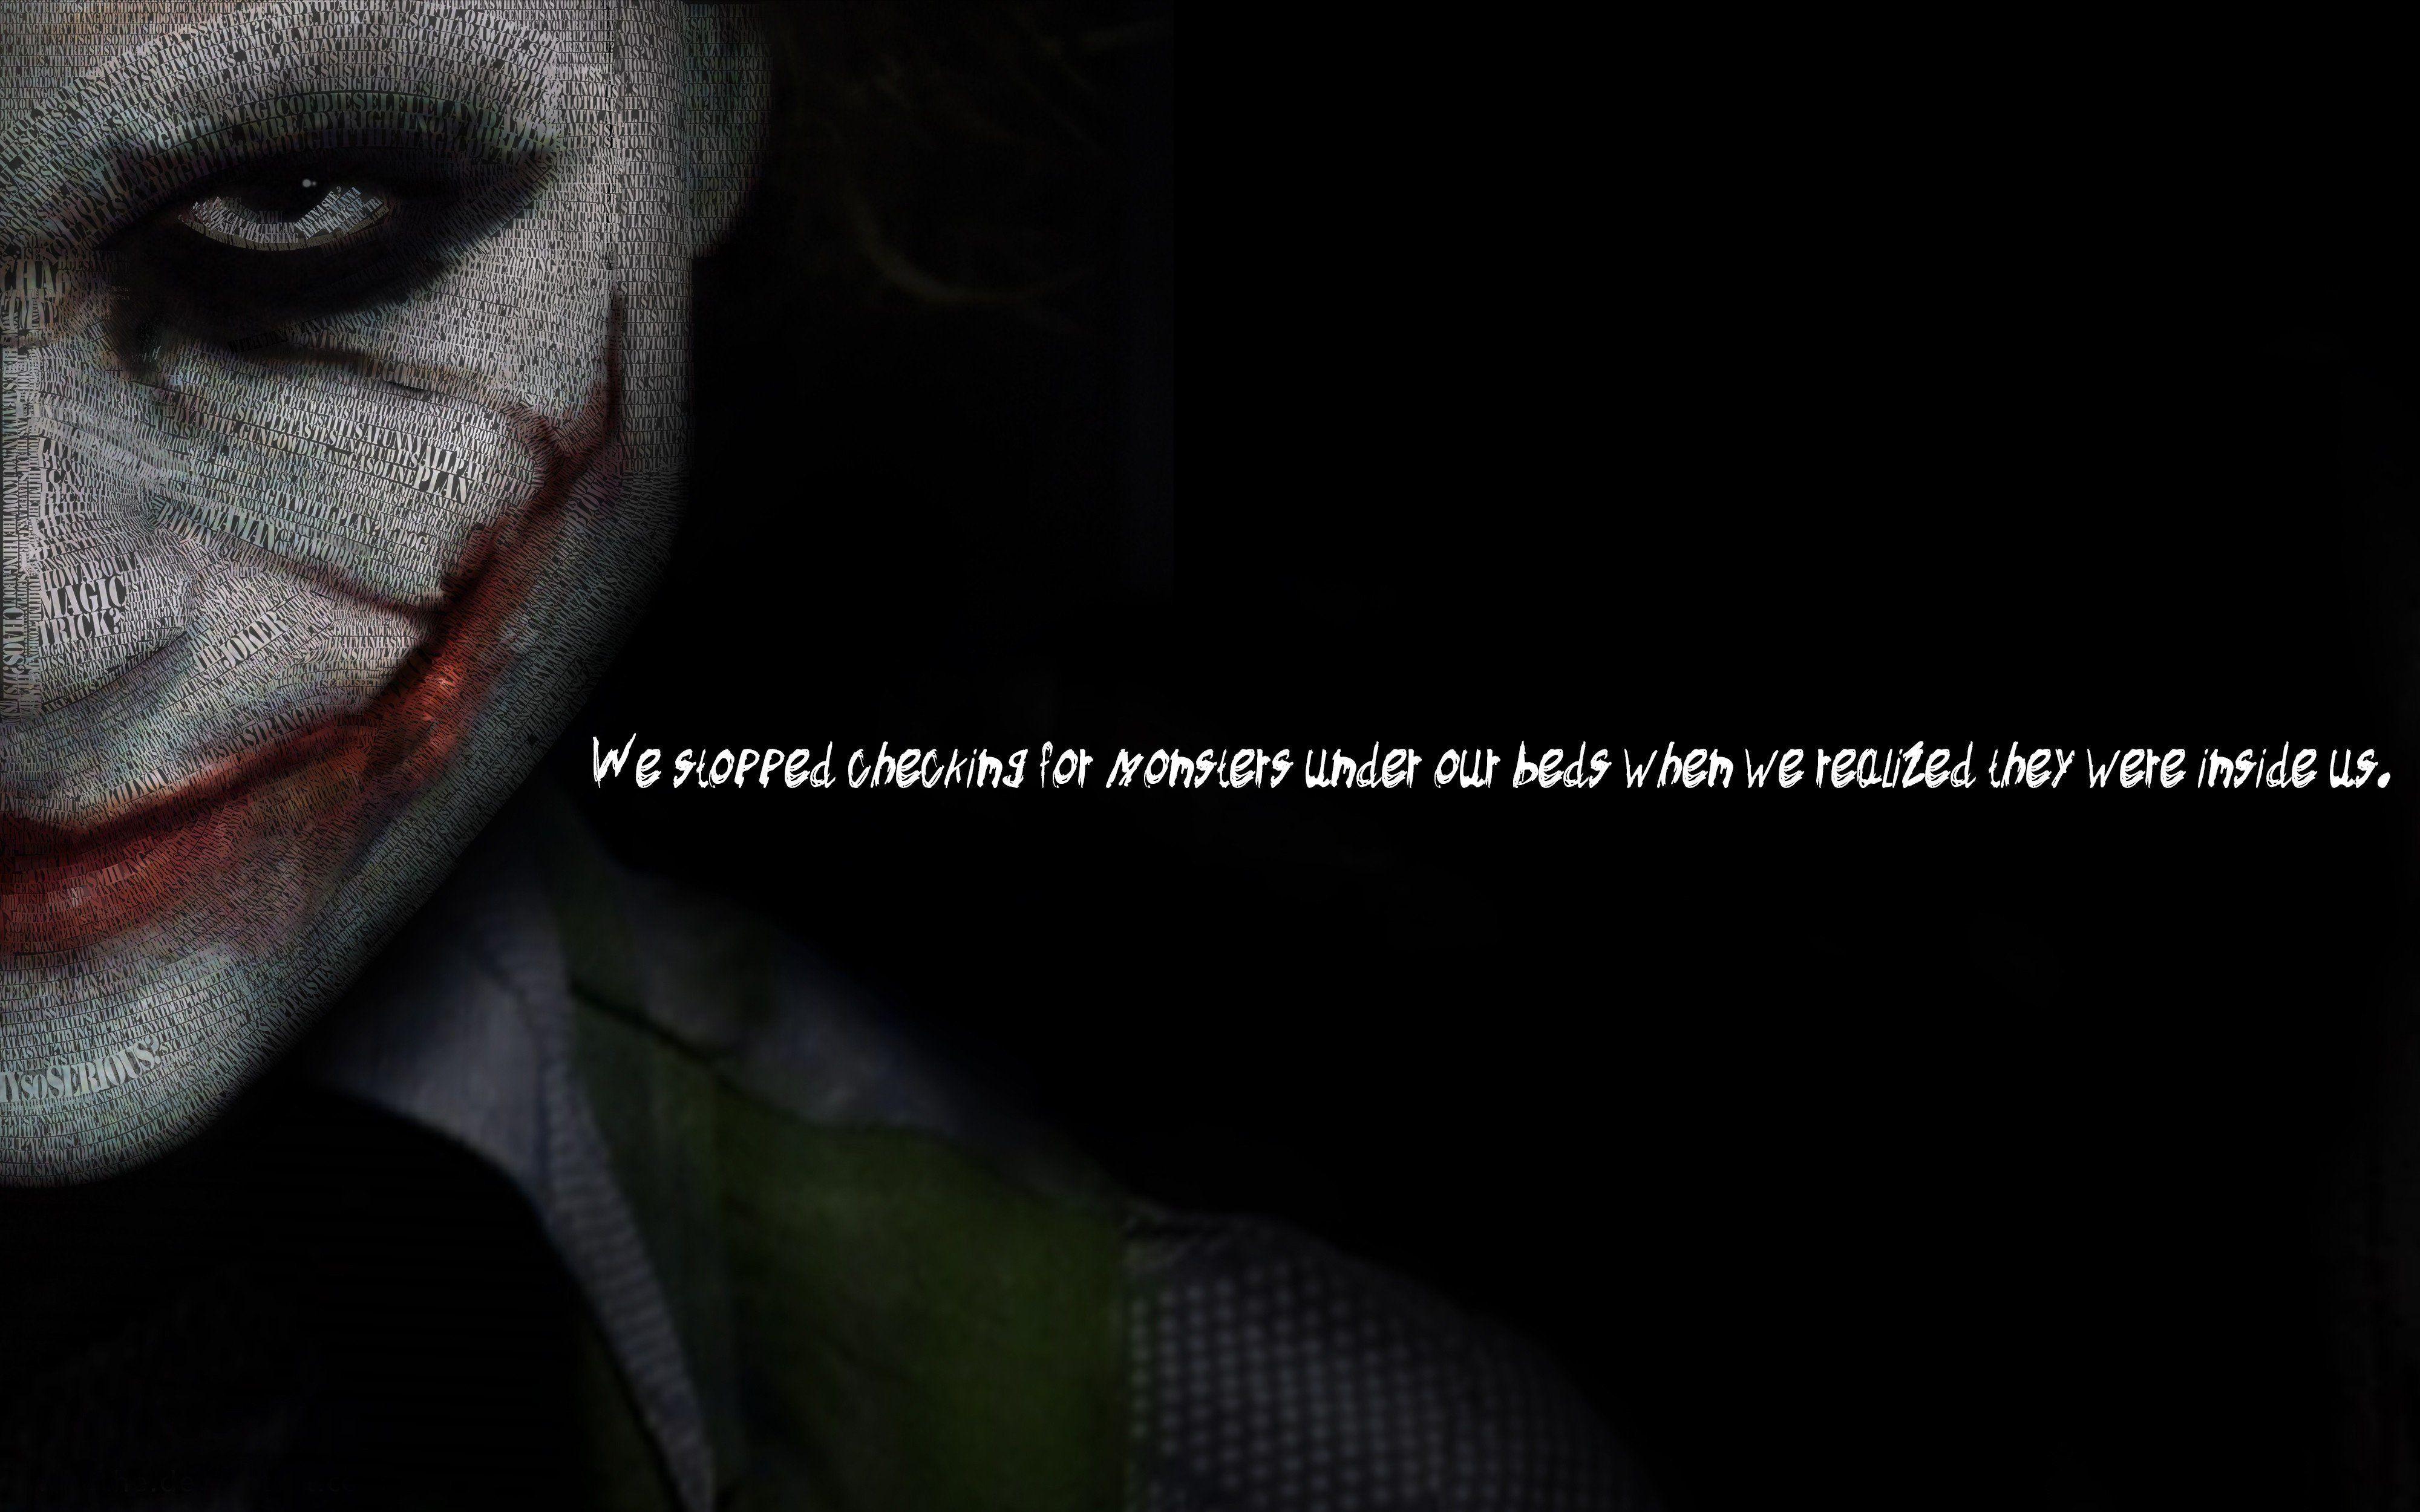 The Joker  Quotes  Wallpapers  Wallpaper  Cave